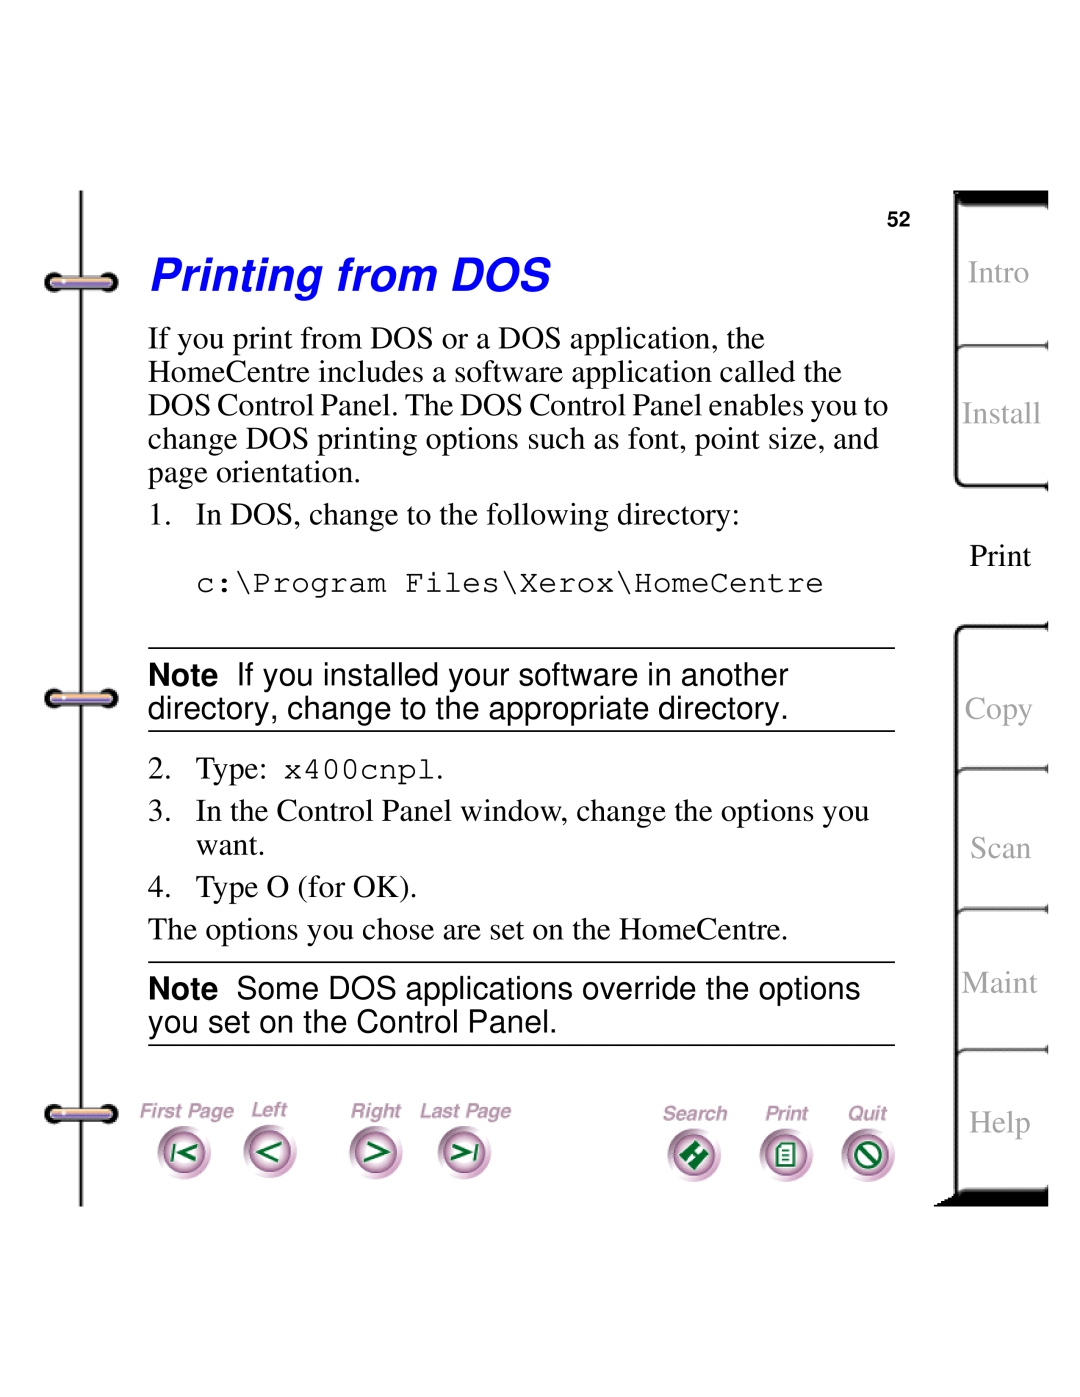 Xerox Document HomeCentre manual Printing from DOS, Intro Install, Copy Scan Maint, Help 